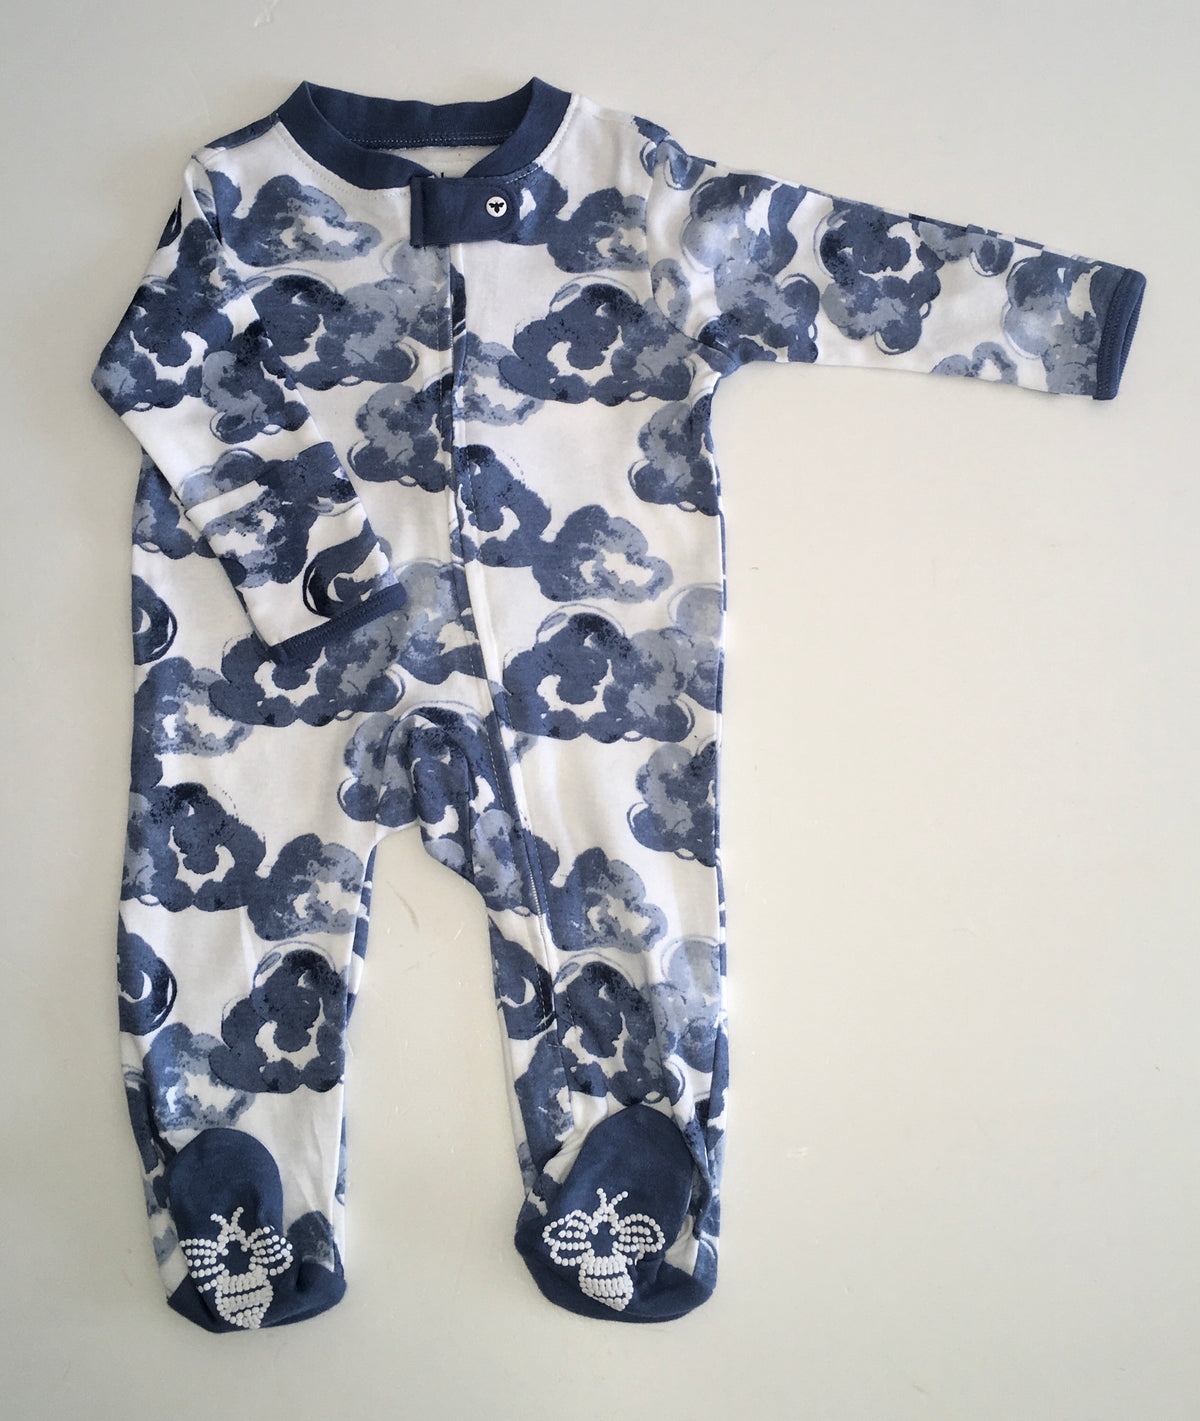 Burts Bees Sleepsuit, BNWOT, Boys Up to 1 Month